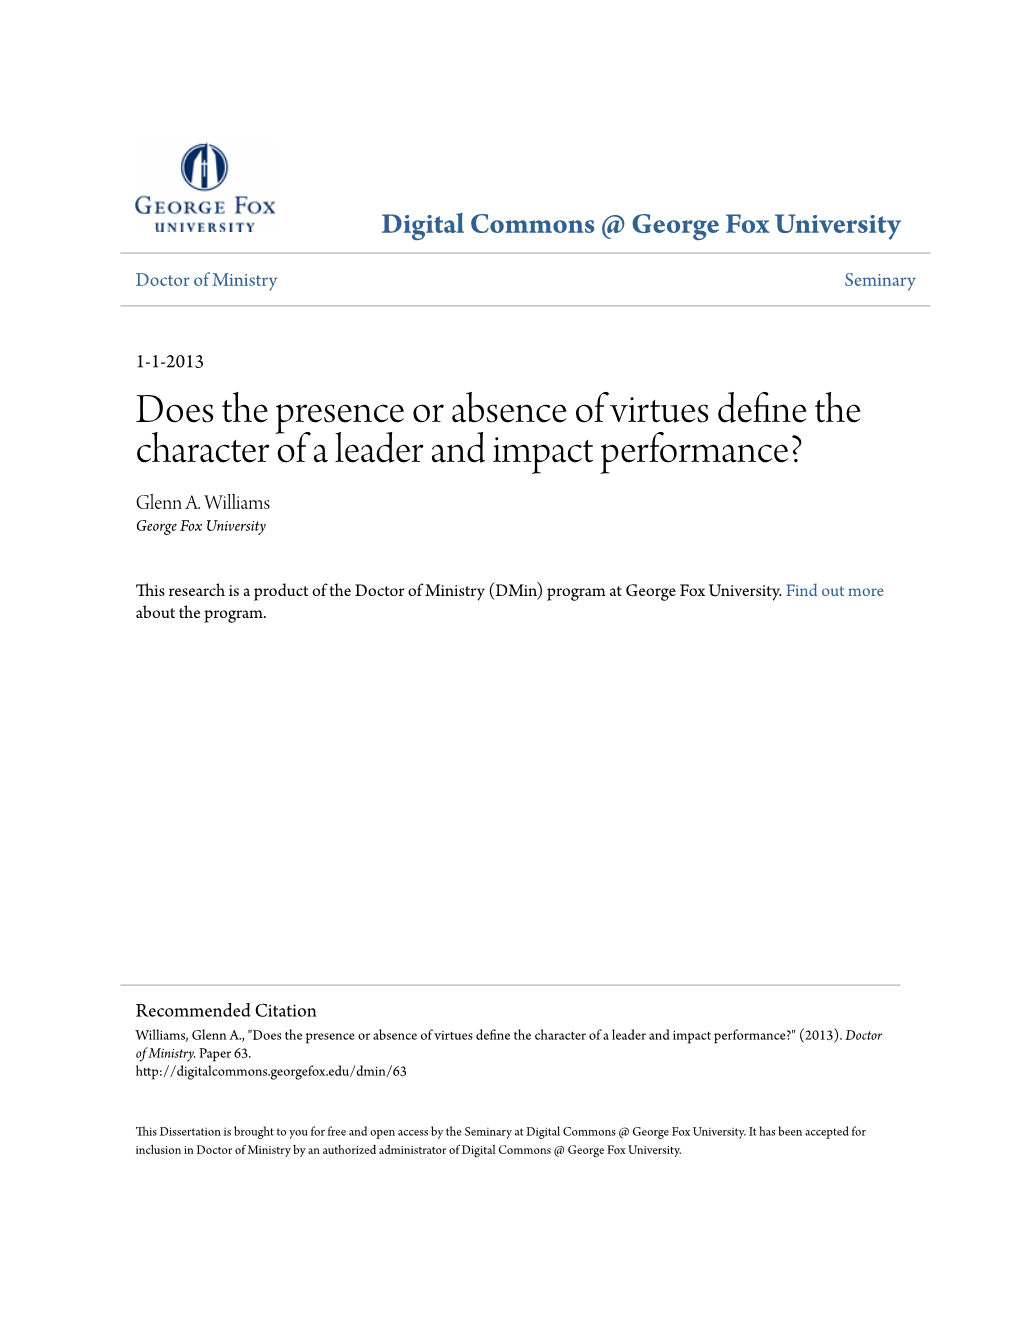 Does the Presence Or Absence of Virtues Define the Character of a Leader and Impact Performance? Glenn A